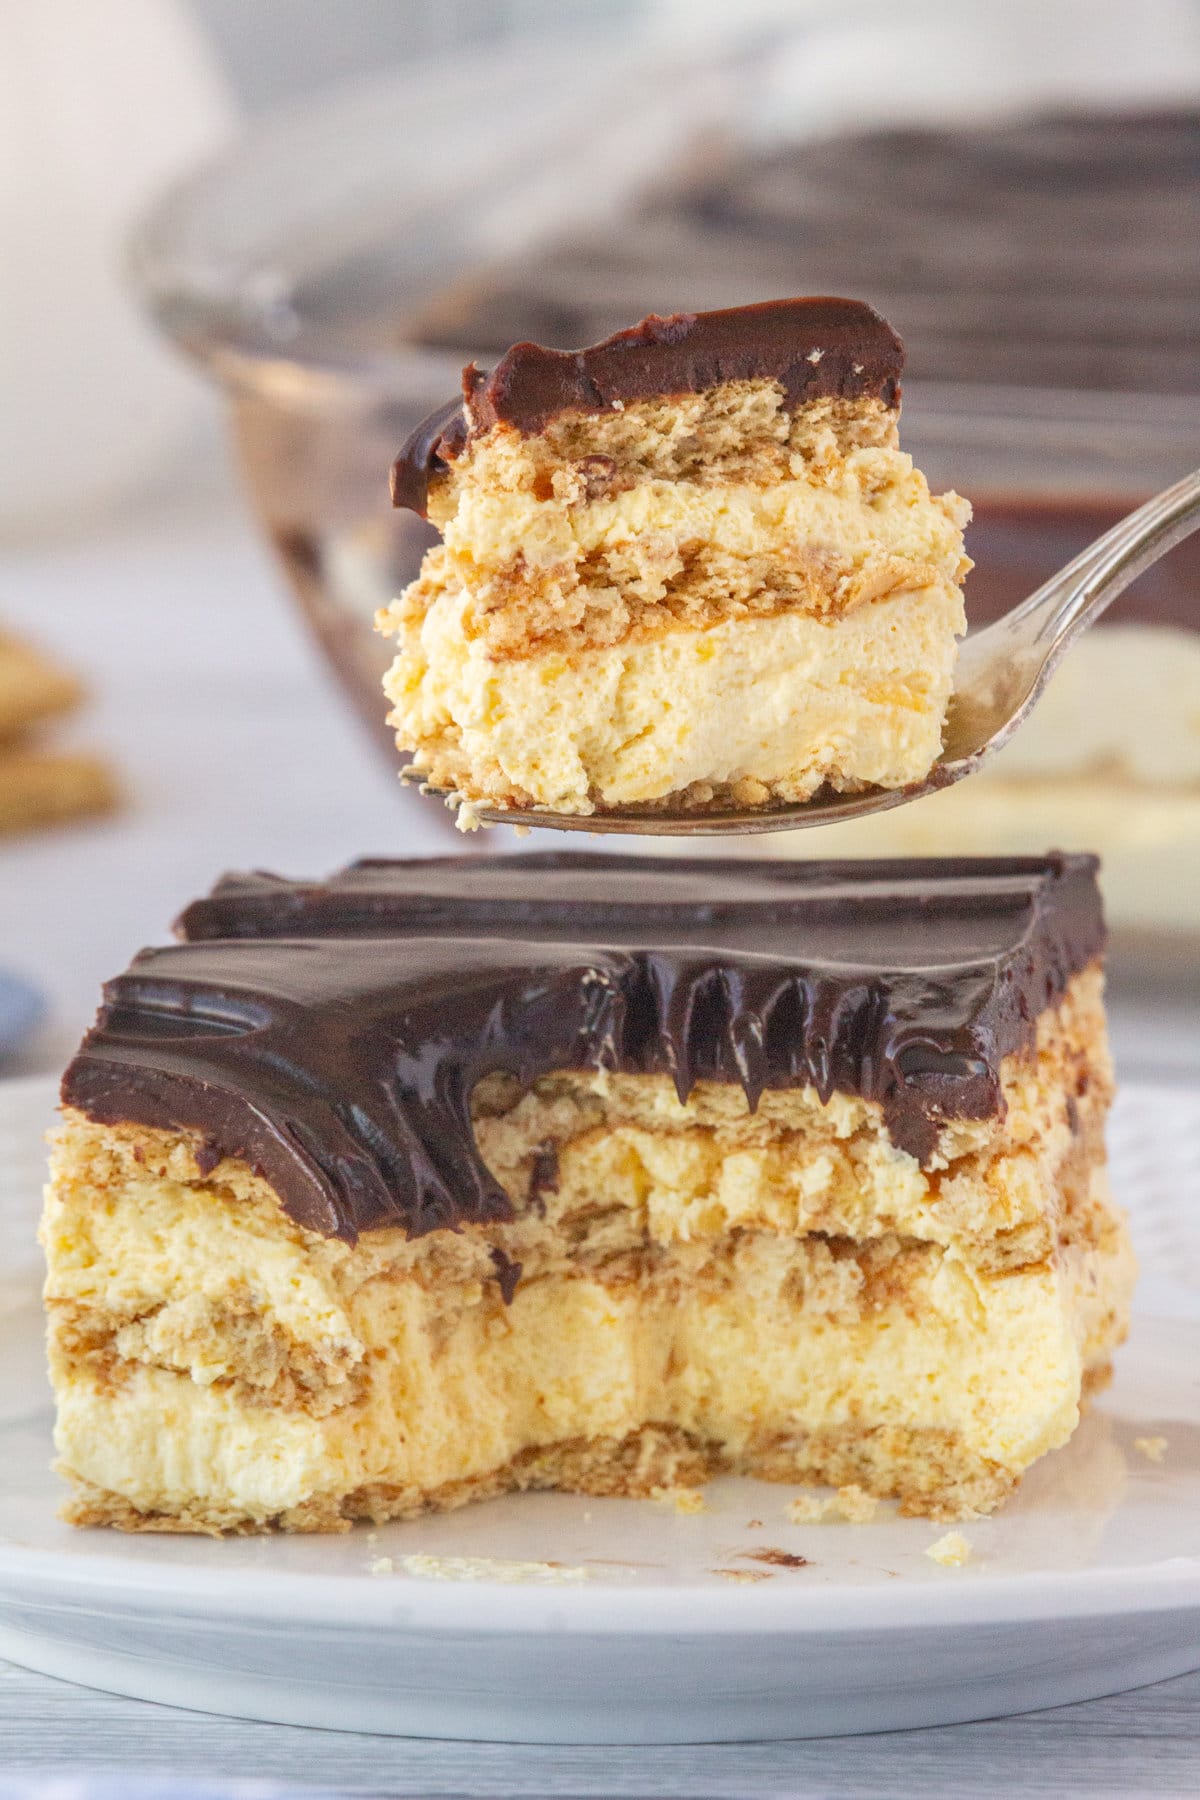 An up-close photo of a slice of eclair cake with a fork scooping a bite.